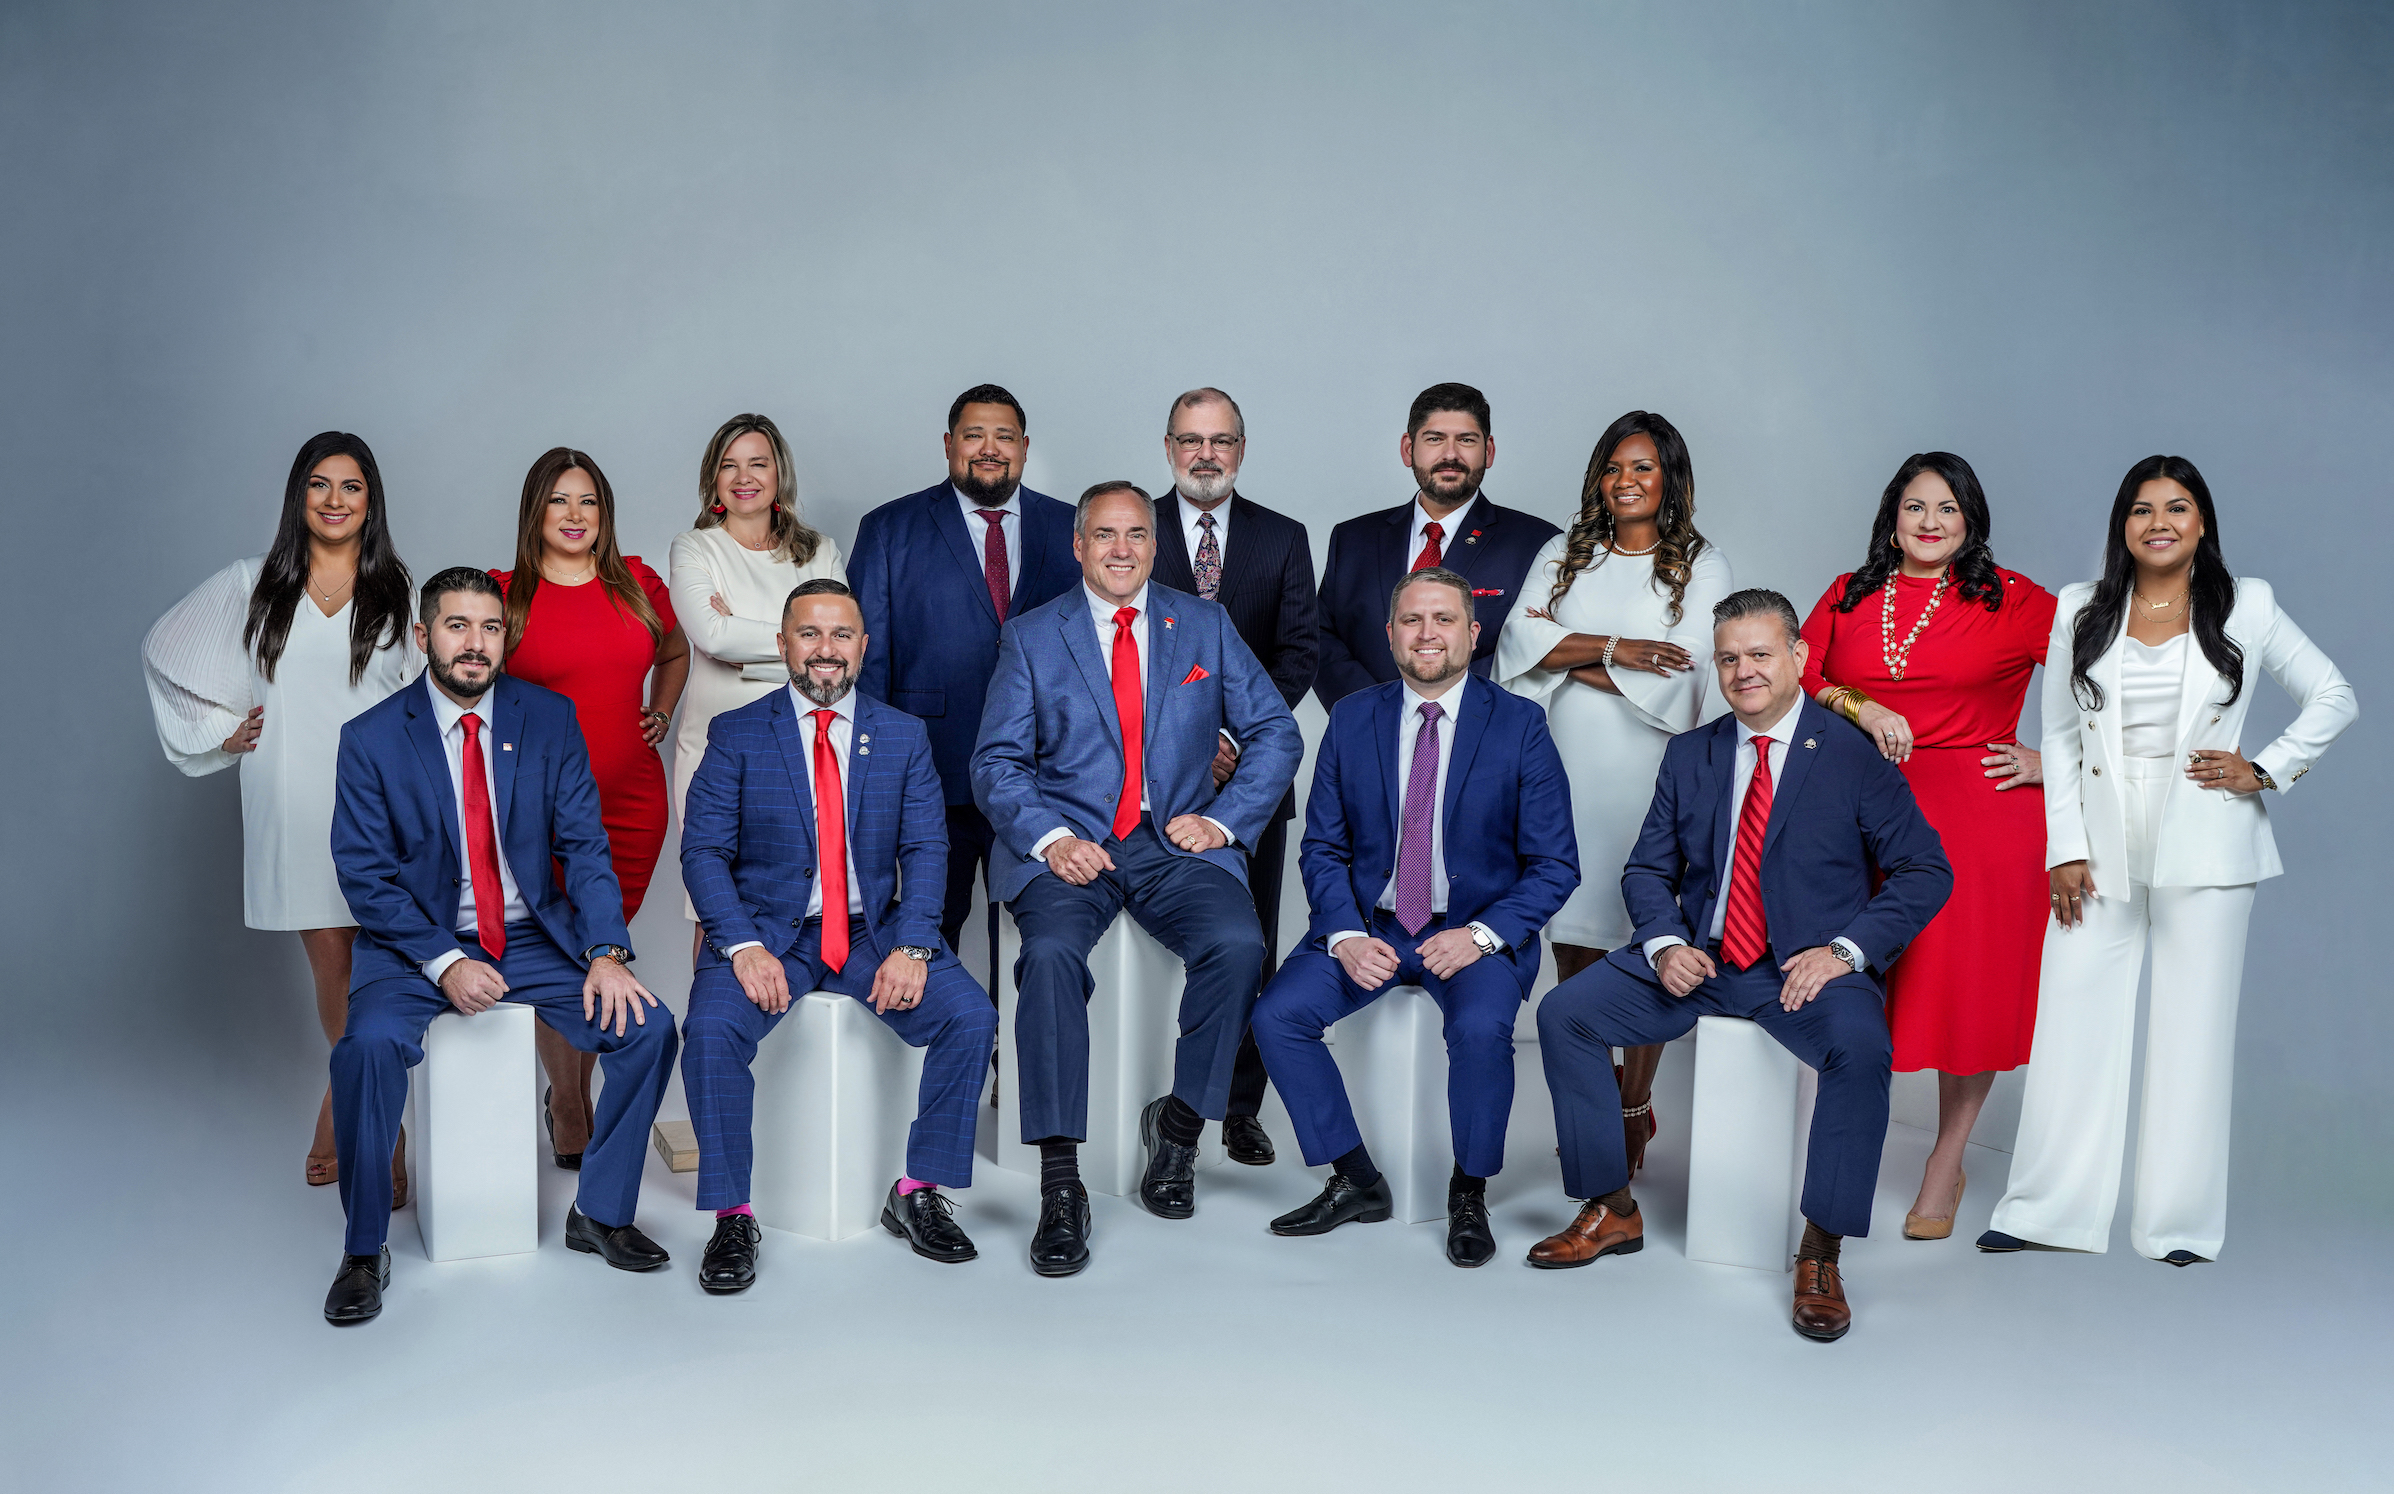 Group Photo - 2022 Board of Directors - Wearing Red White and Blue